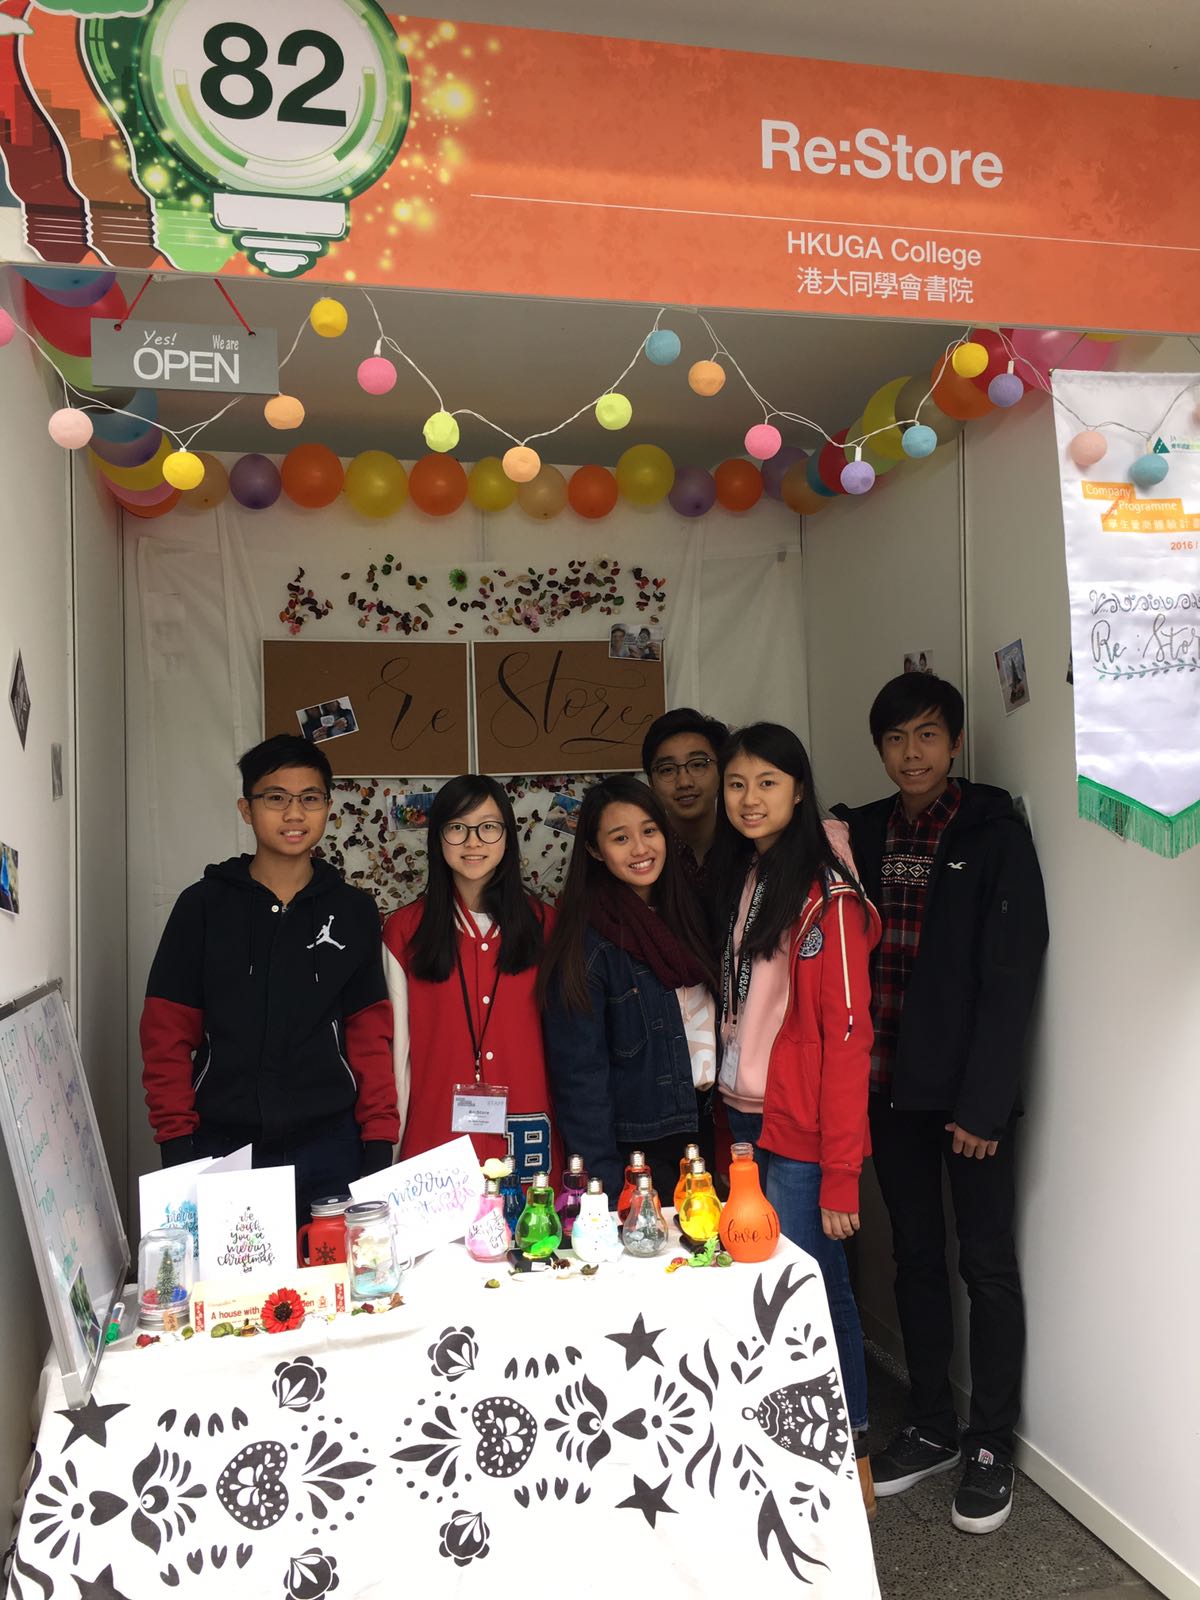 Group photo of participated students in front of the booth.